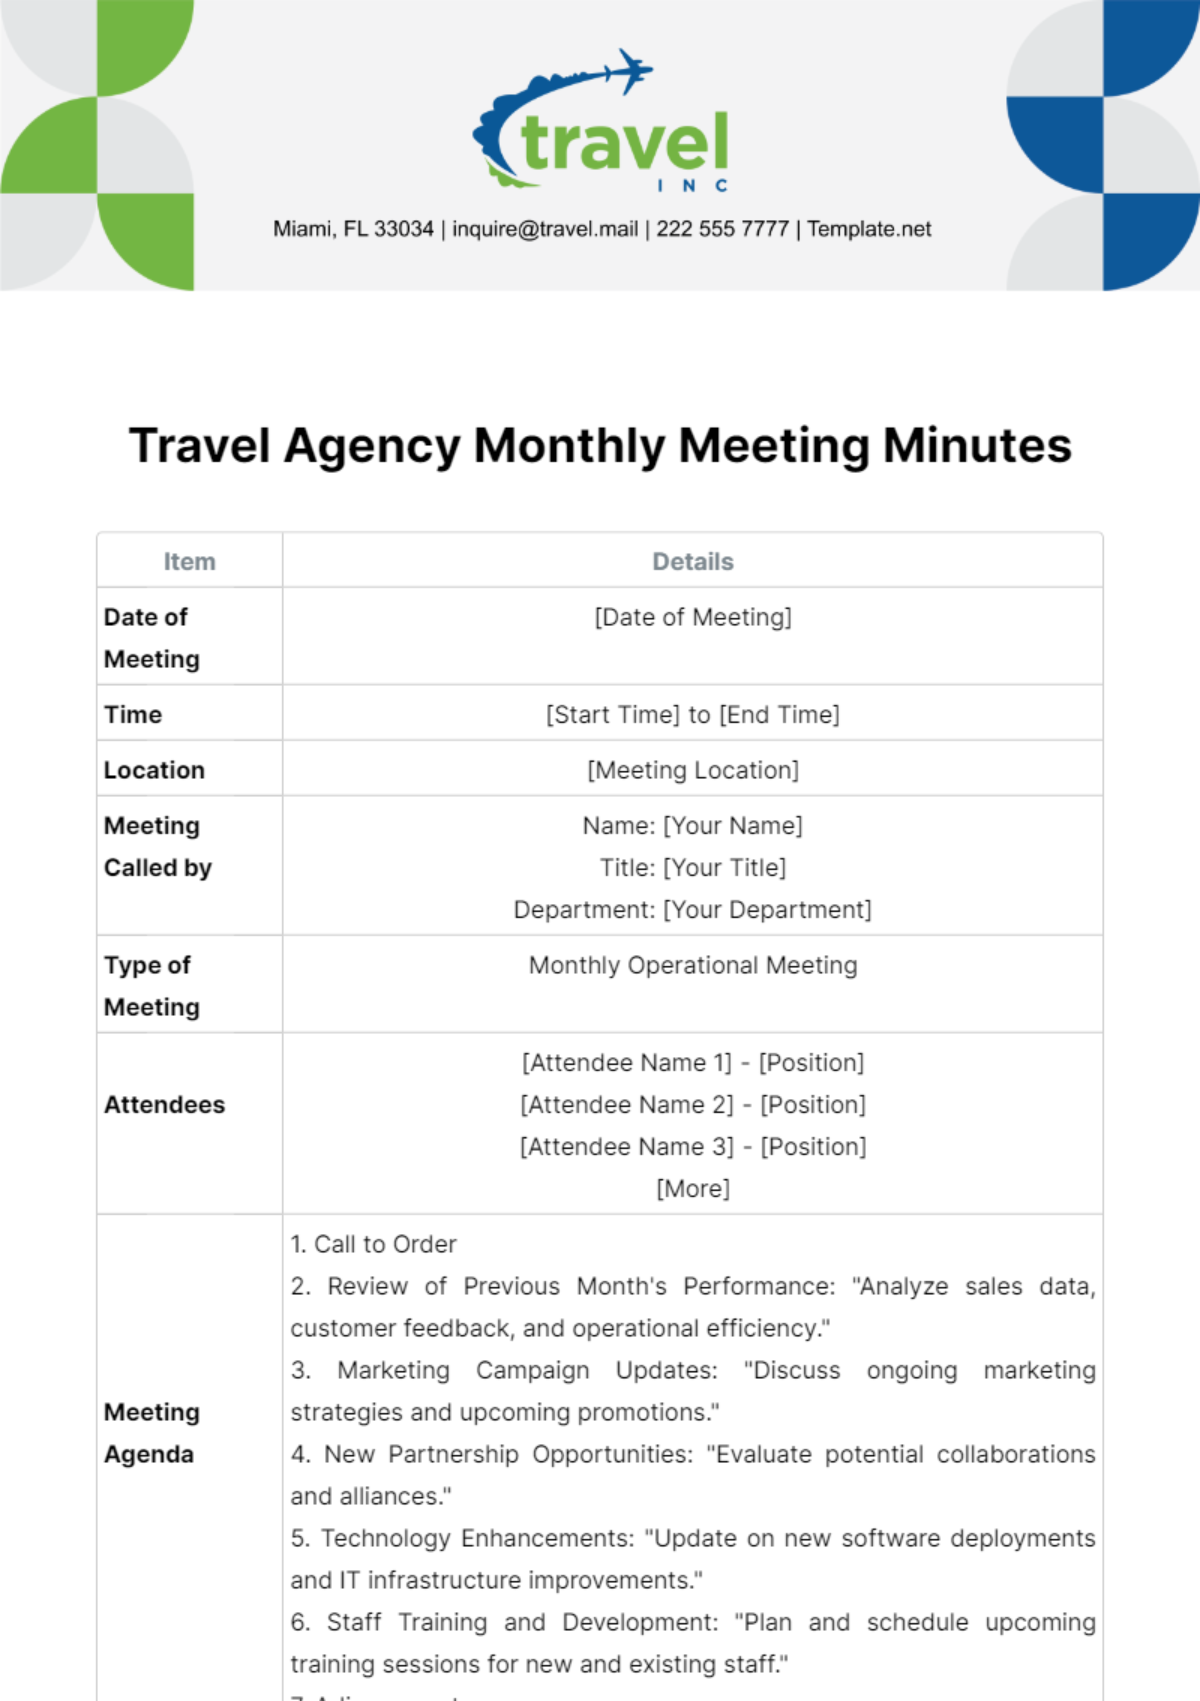 Free Travel Agency Monthly Meeting Minutes Template